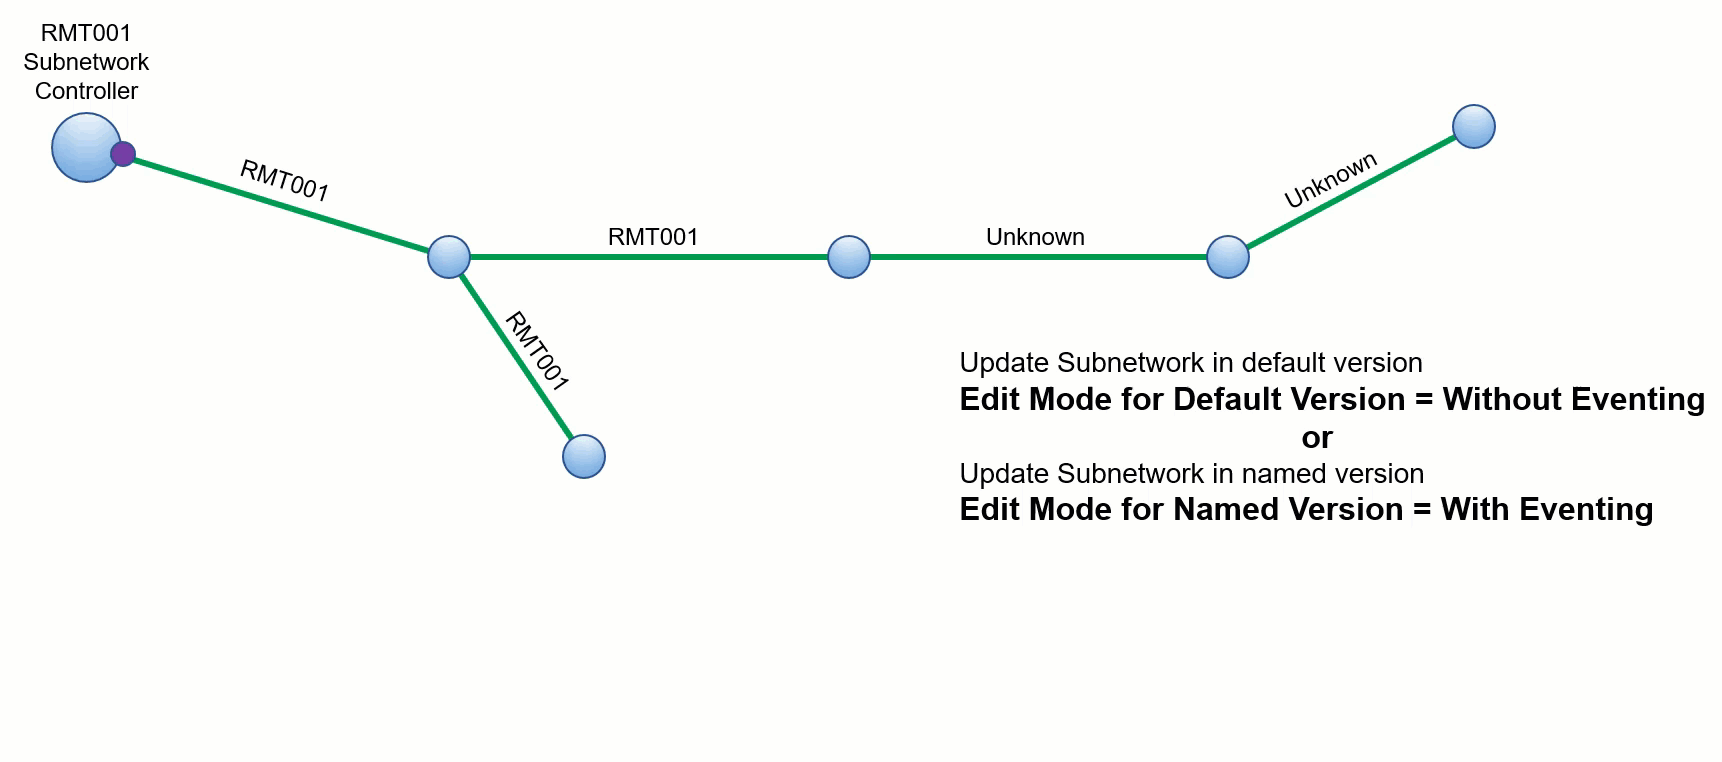 Example of update subnetwork operation run in the default version (With Eventing and Without Eventing) and in a named version using With Eventing.